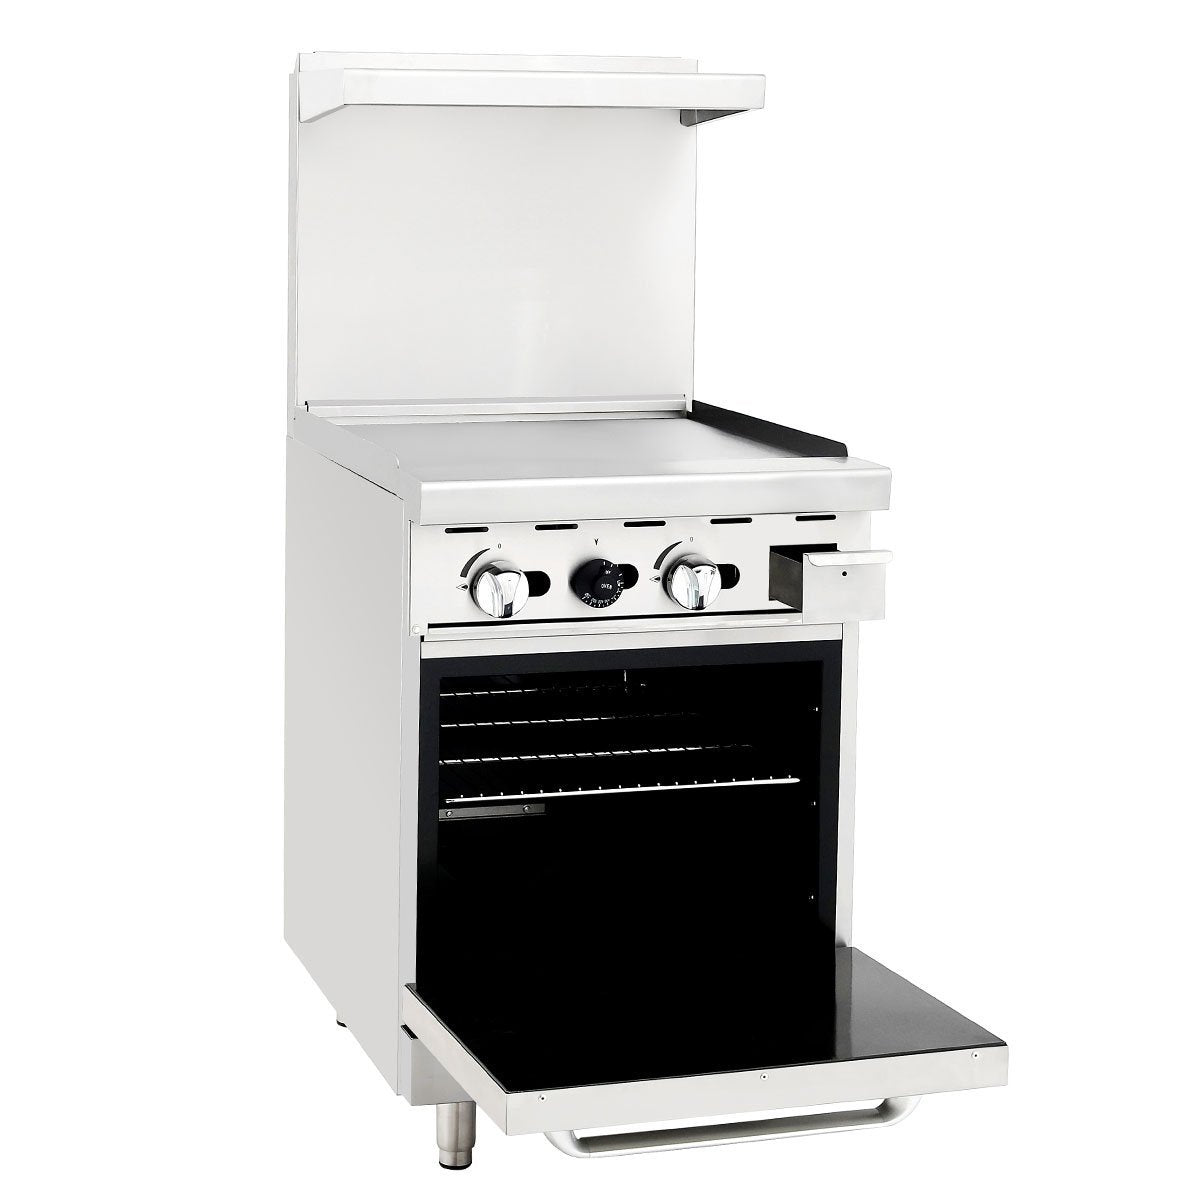 Atosa CookRite ATO-24G 24" Gas Range 24" Wide Griddle - NG